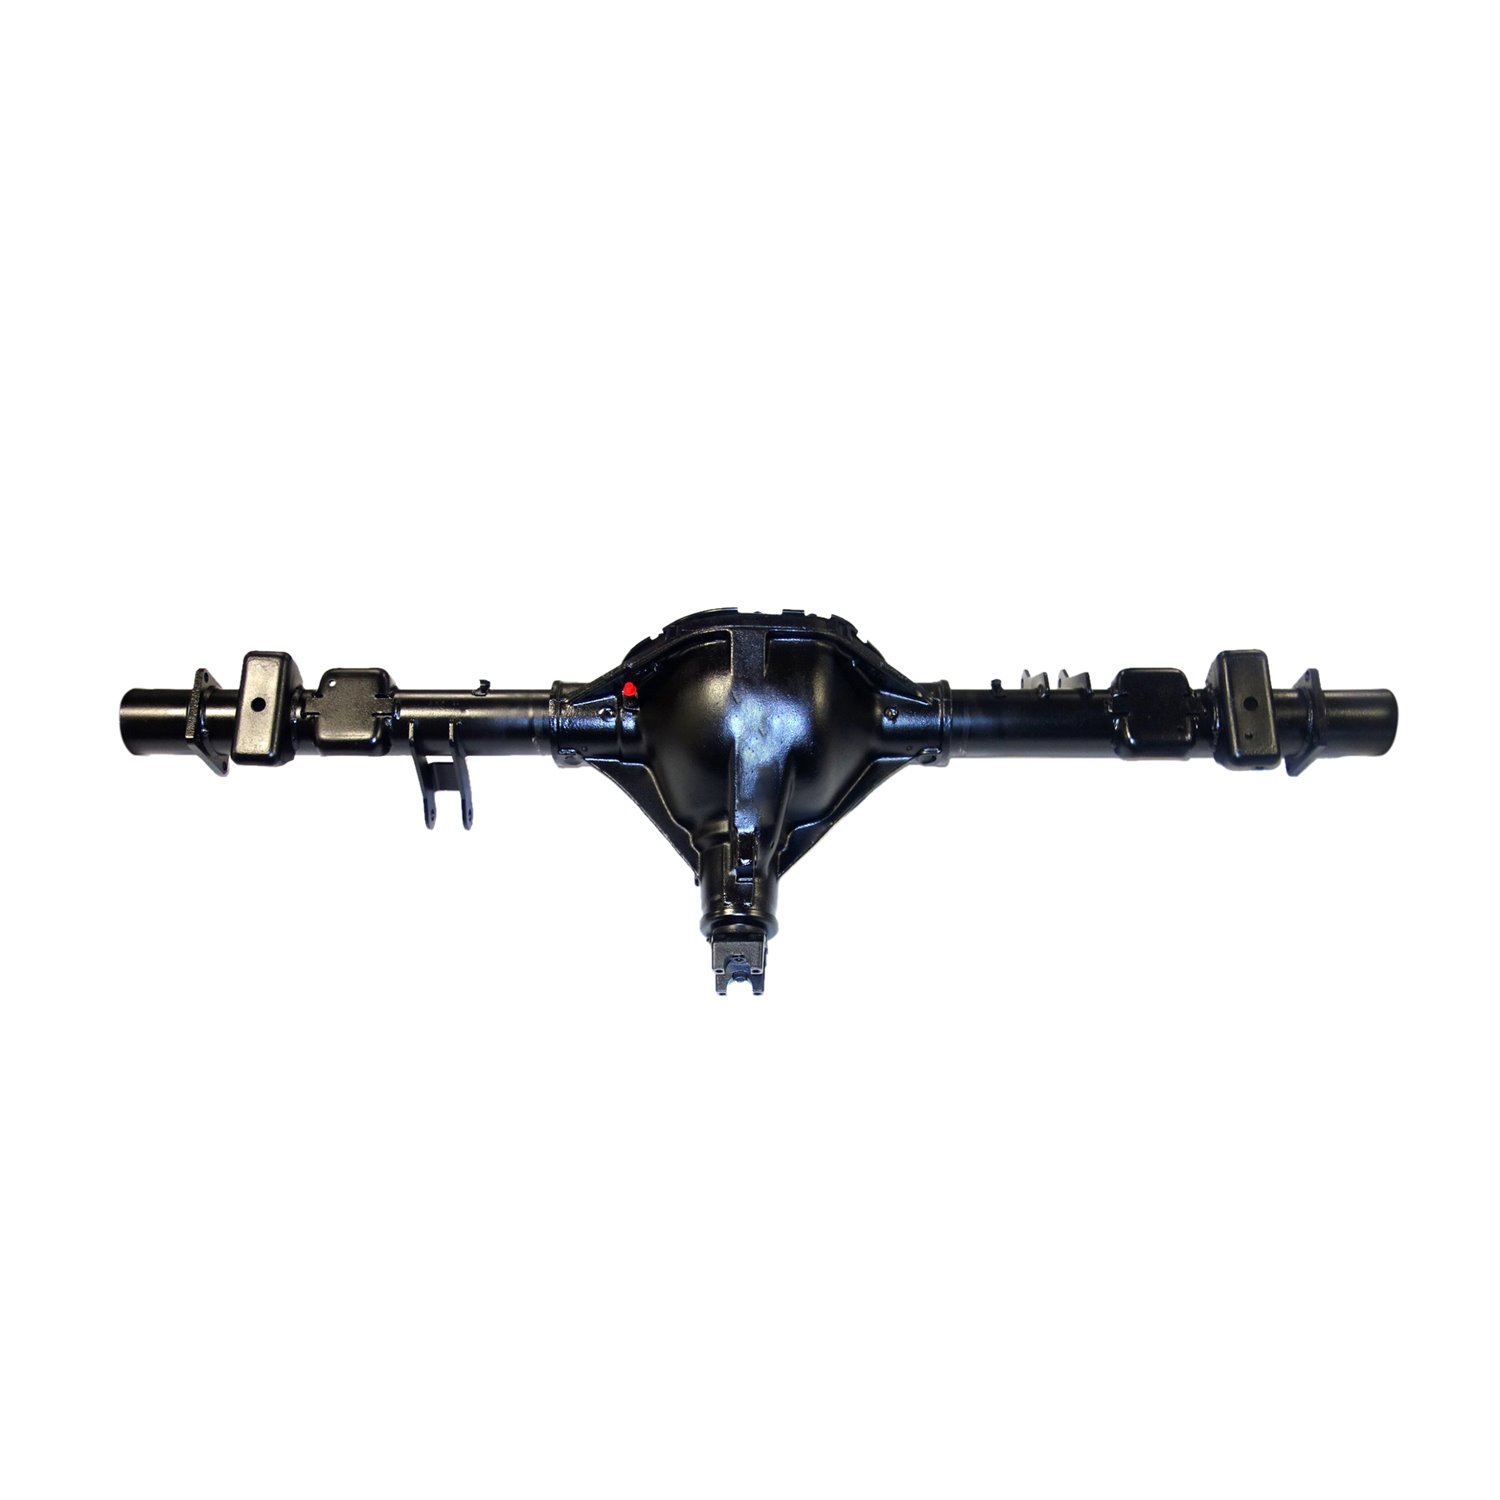 Remanufactured Axle Assembly for GM 9.5" 1996-02 GM Van 2500 6 Lug, 3.42 Ratio, Open